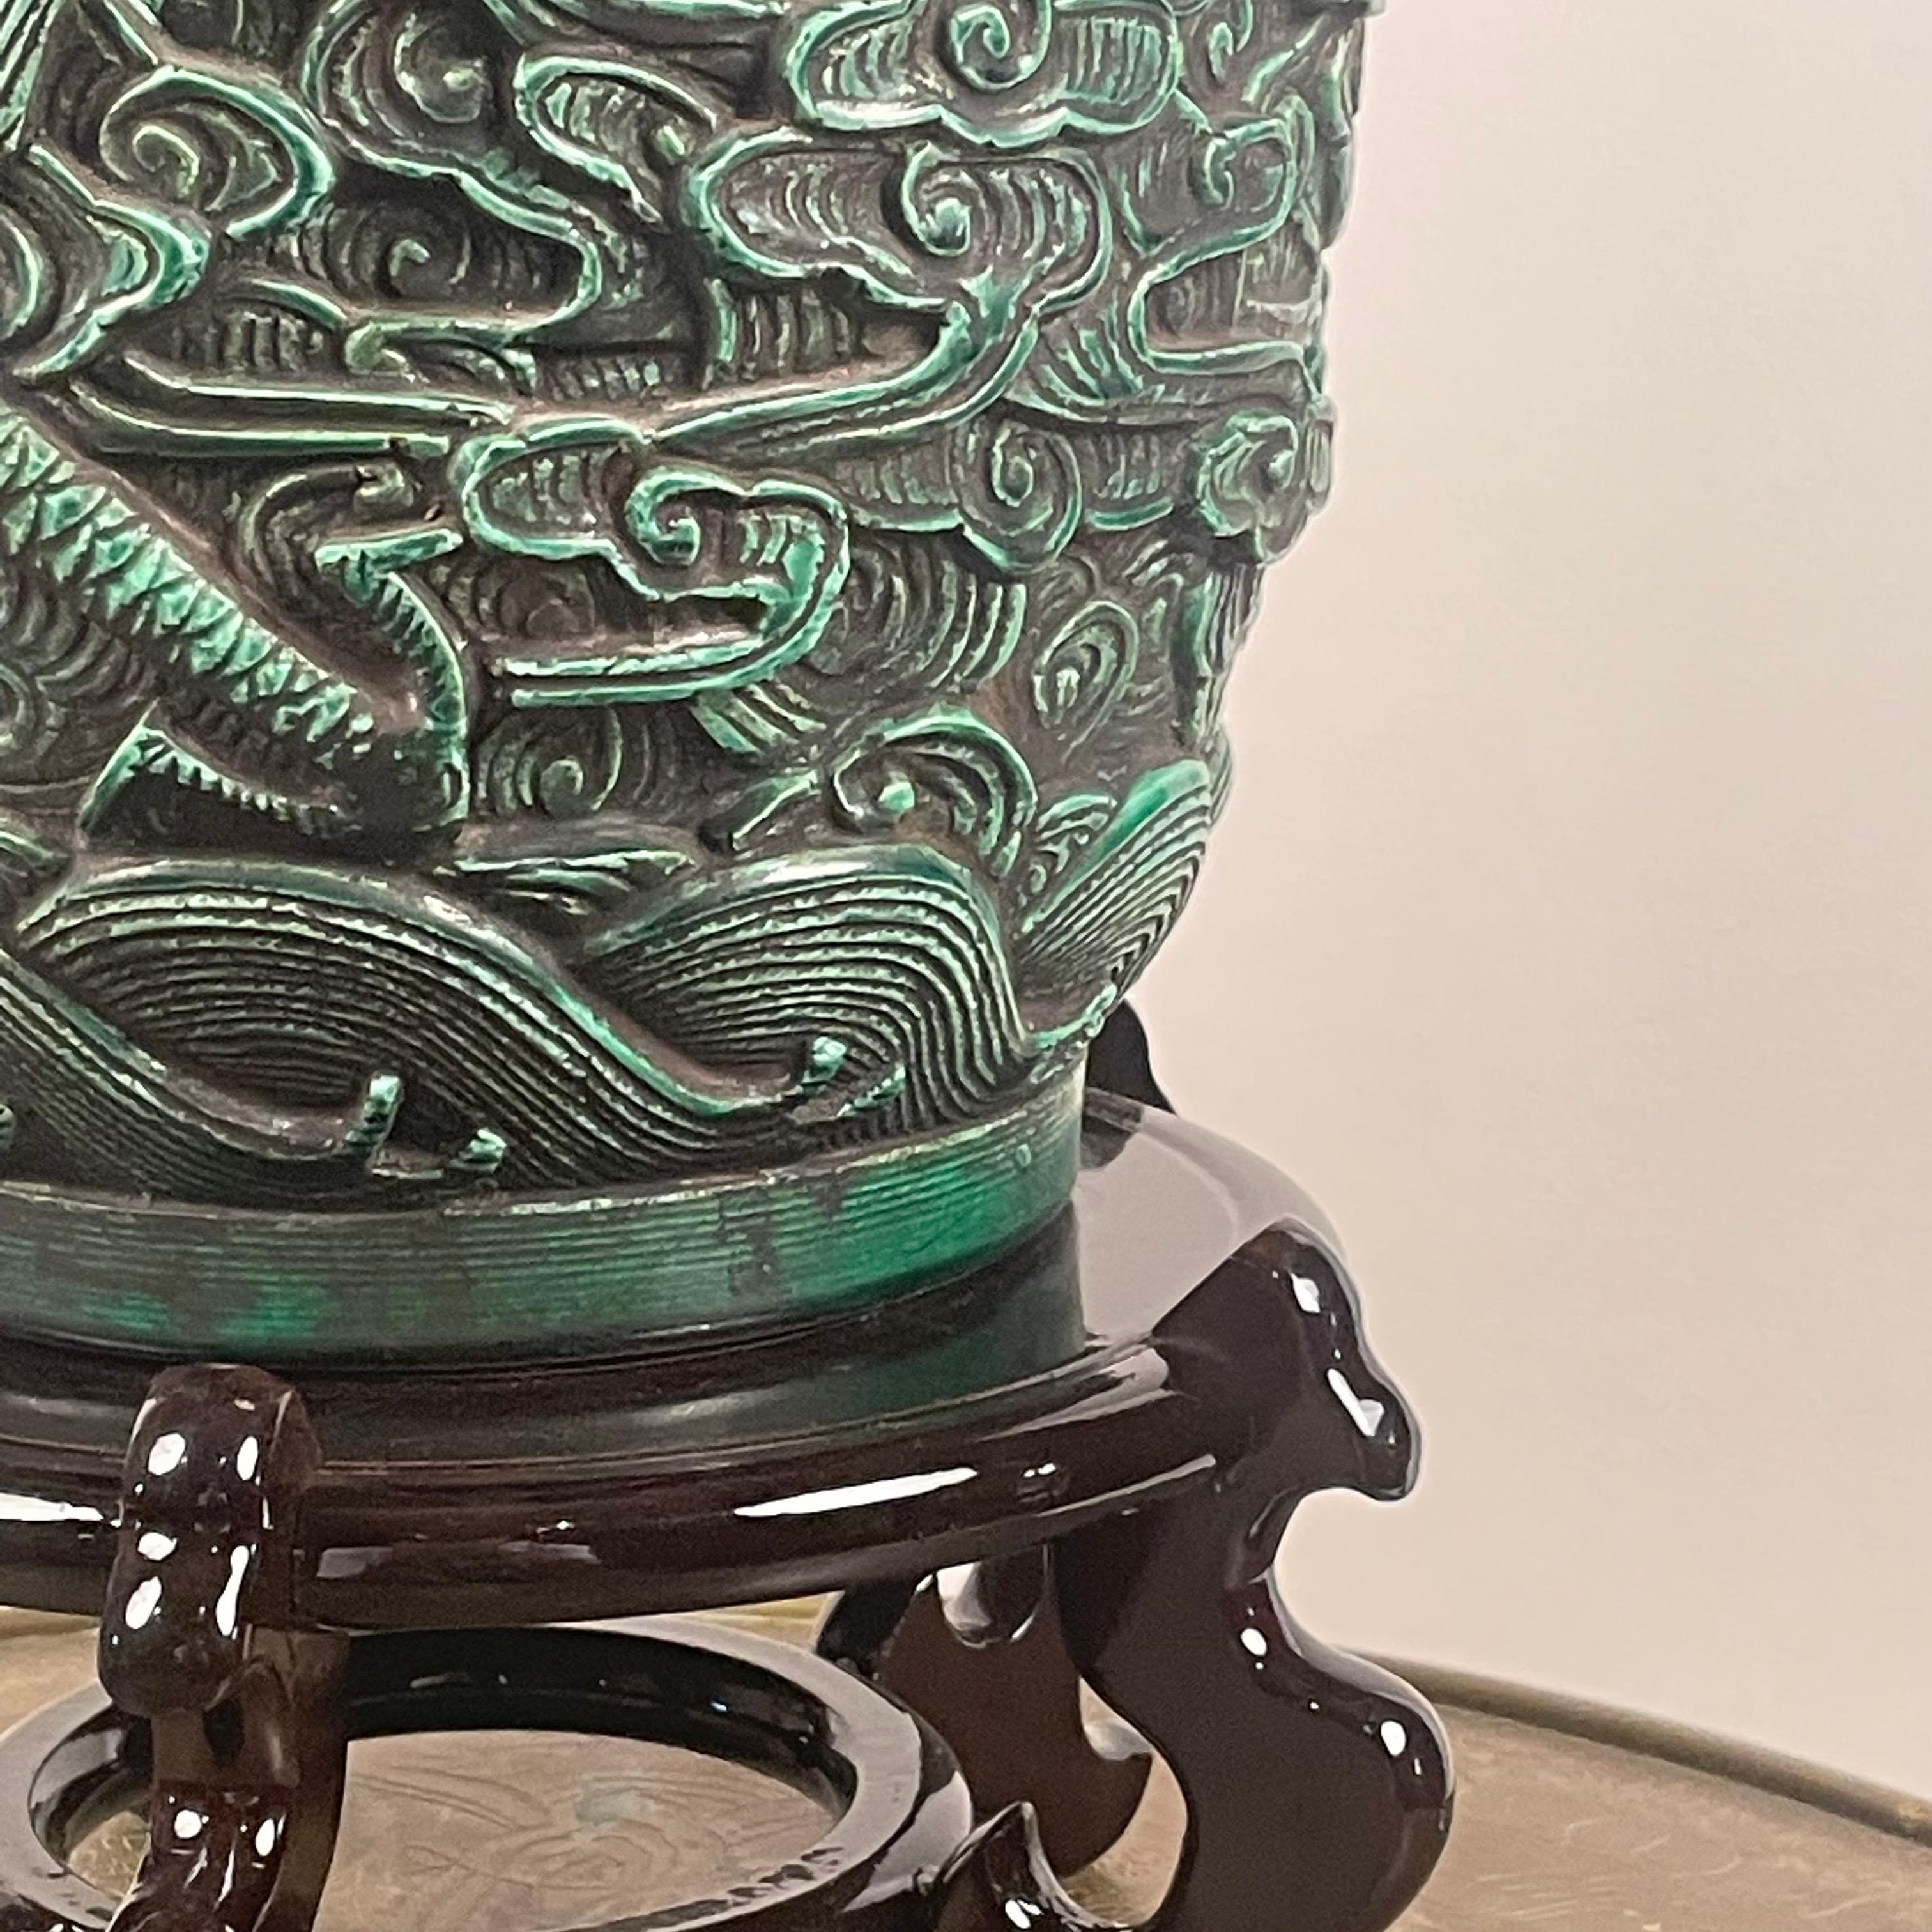 Chinese Lacquer and Bronze Table & Green Dragon Vase the Style of Tony Duquette In Excellent Condition For Sale In Los Angeles, CA